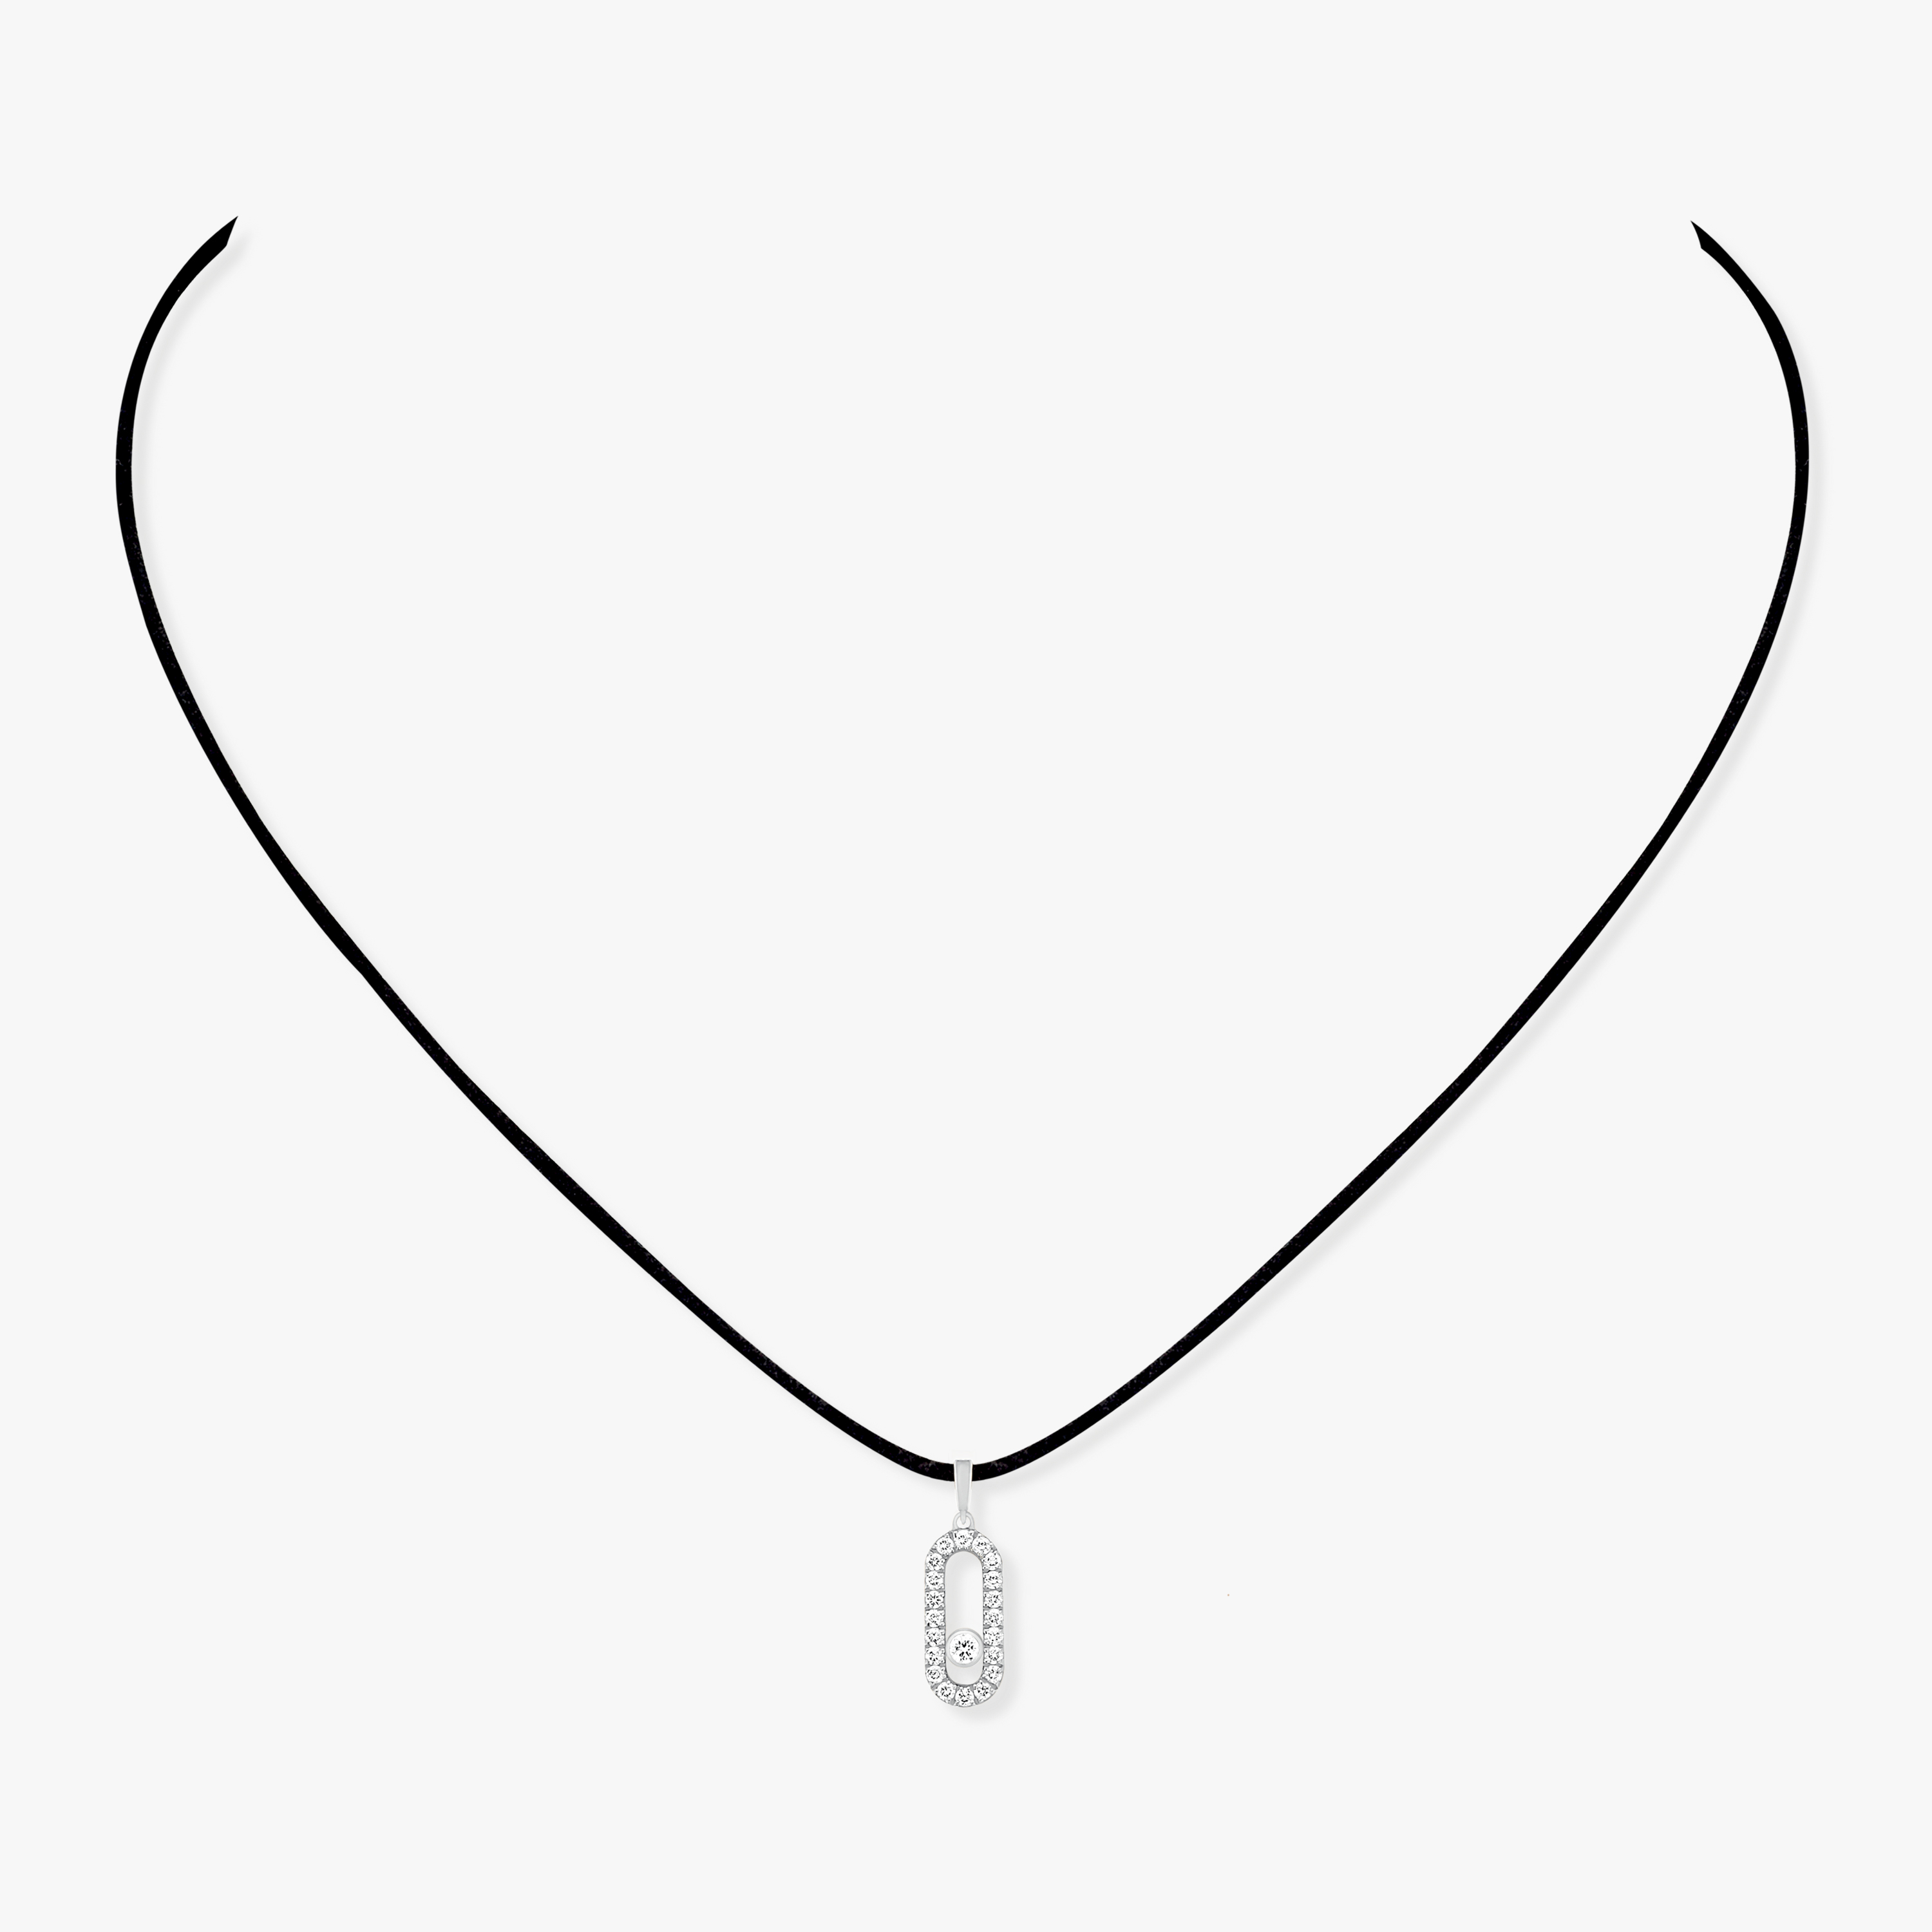 Collier Femme Or Blanc Diamant Collier Messika CARE(S) Pavé 12073-WG